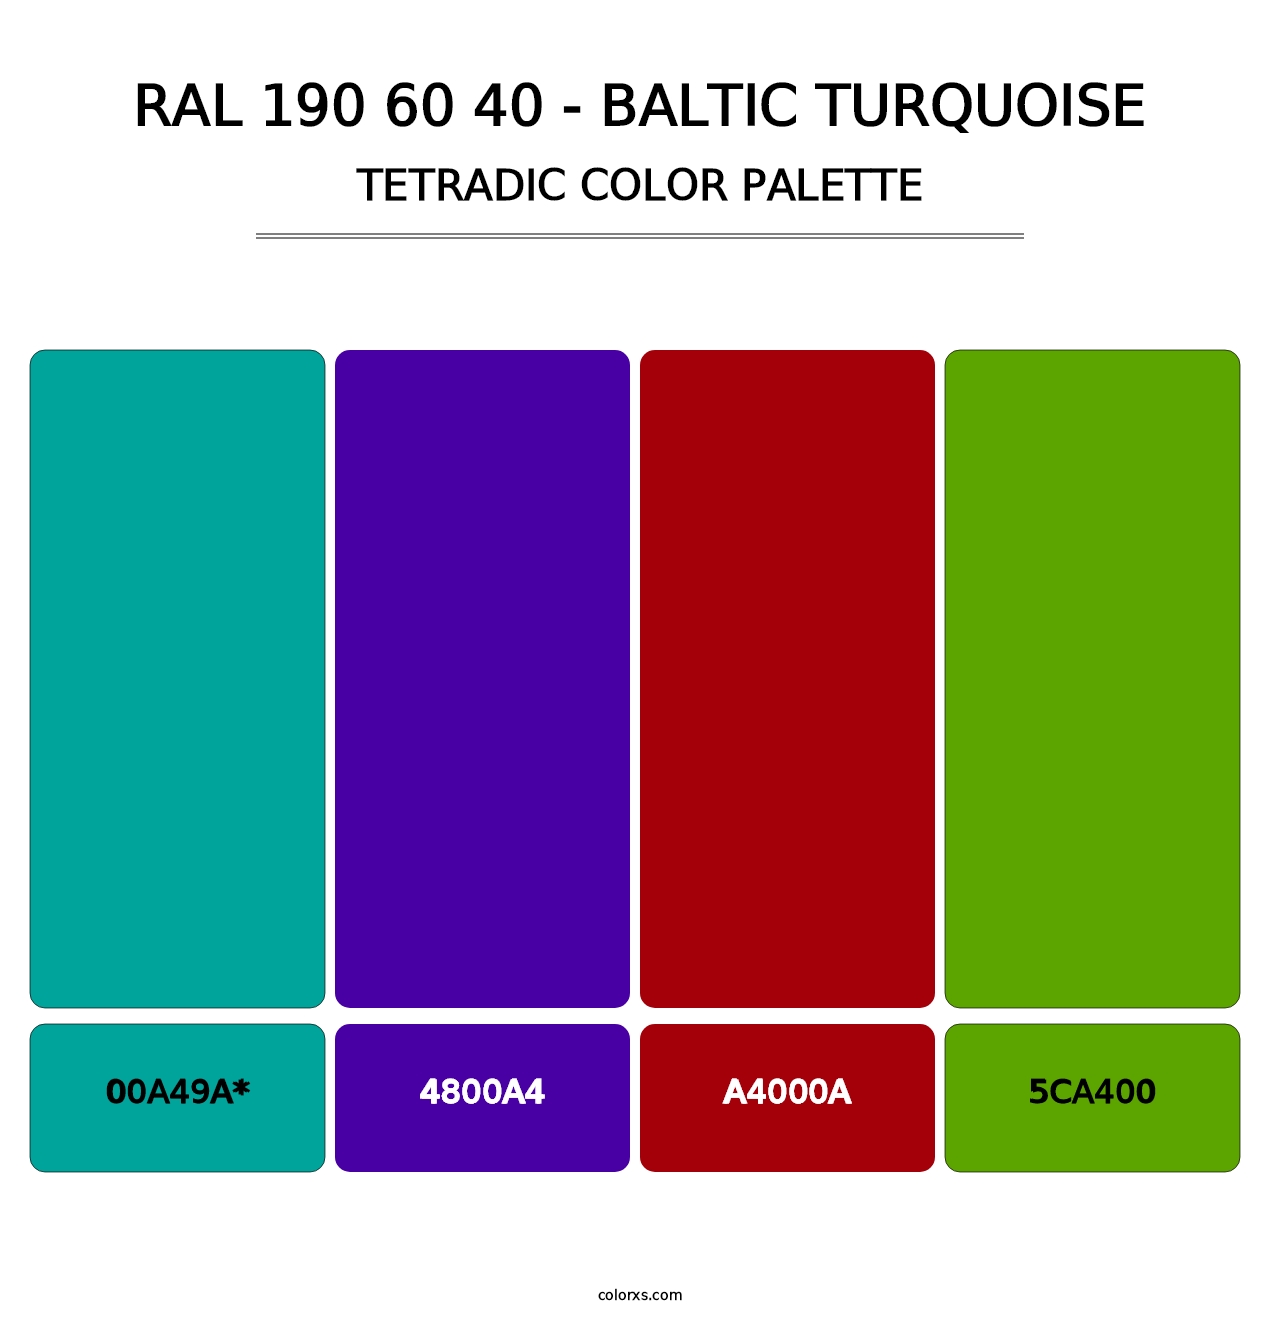 RAL 190 60 40 - Baltic Turquoise - Tetradic Color Palette